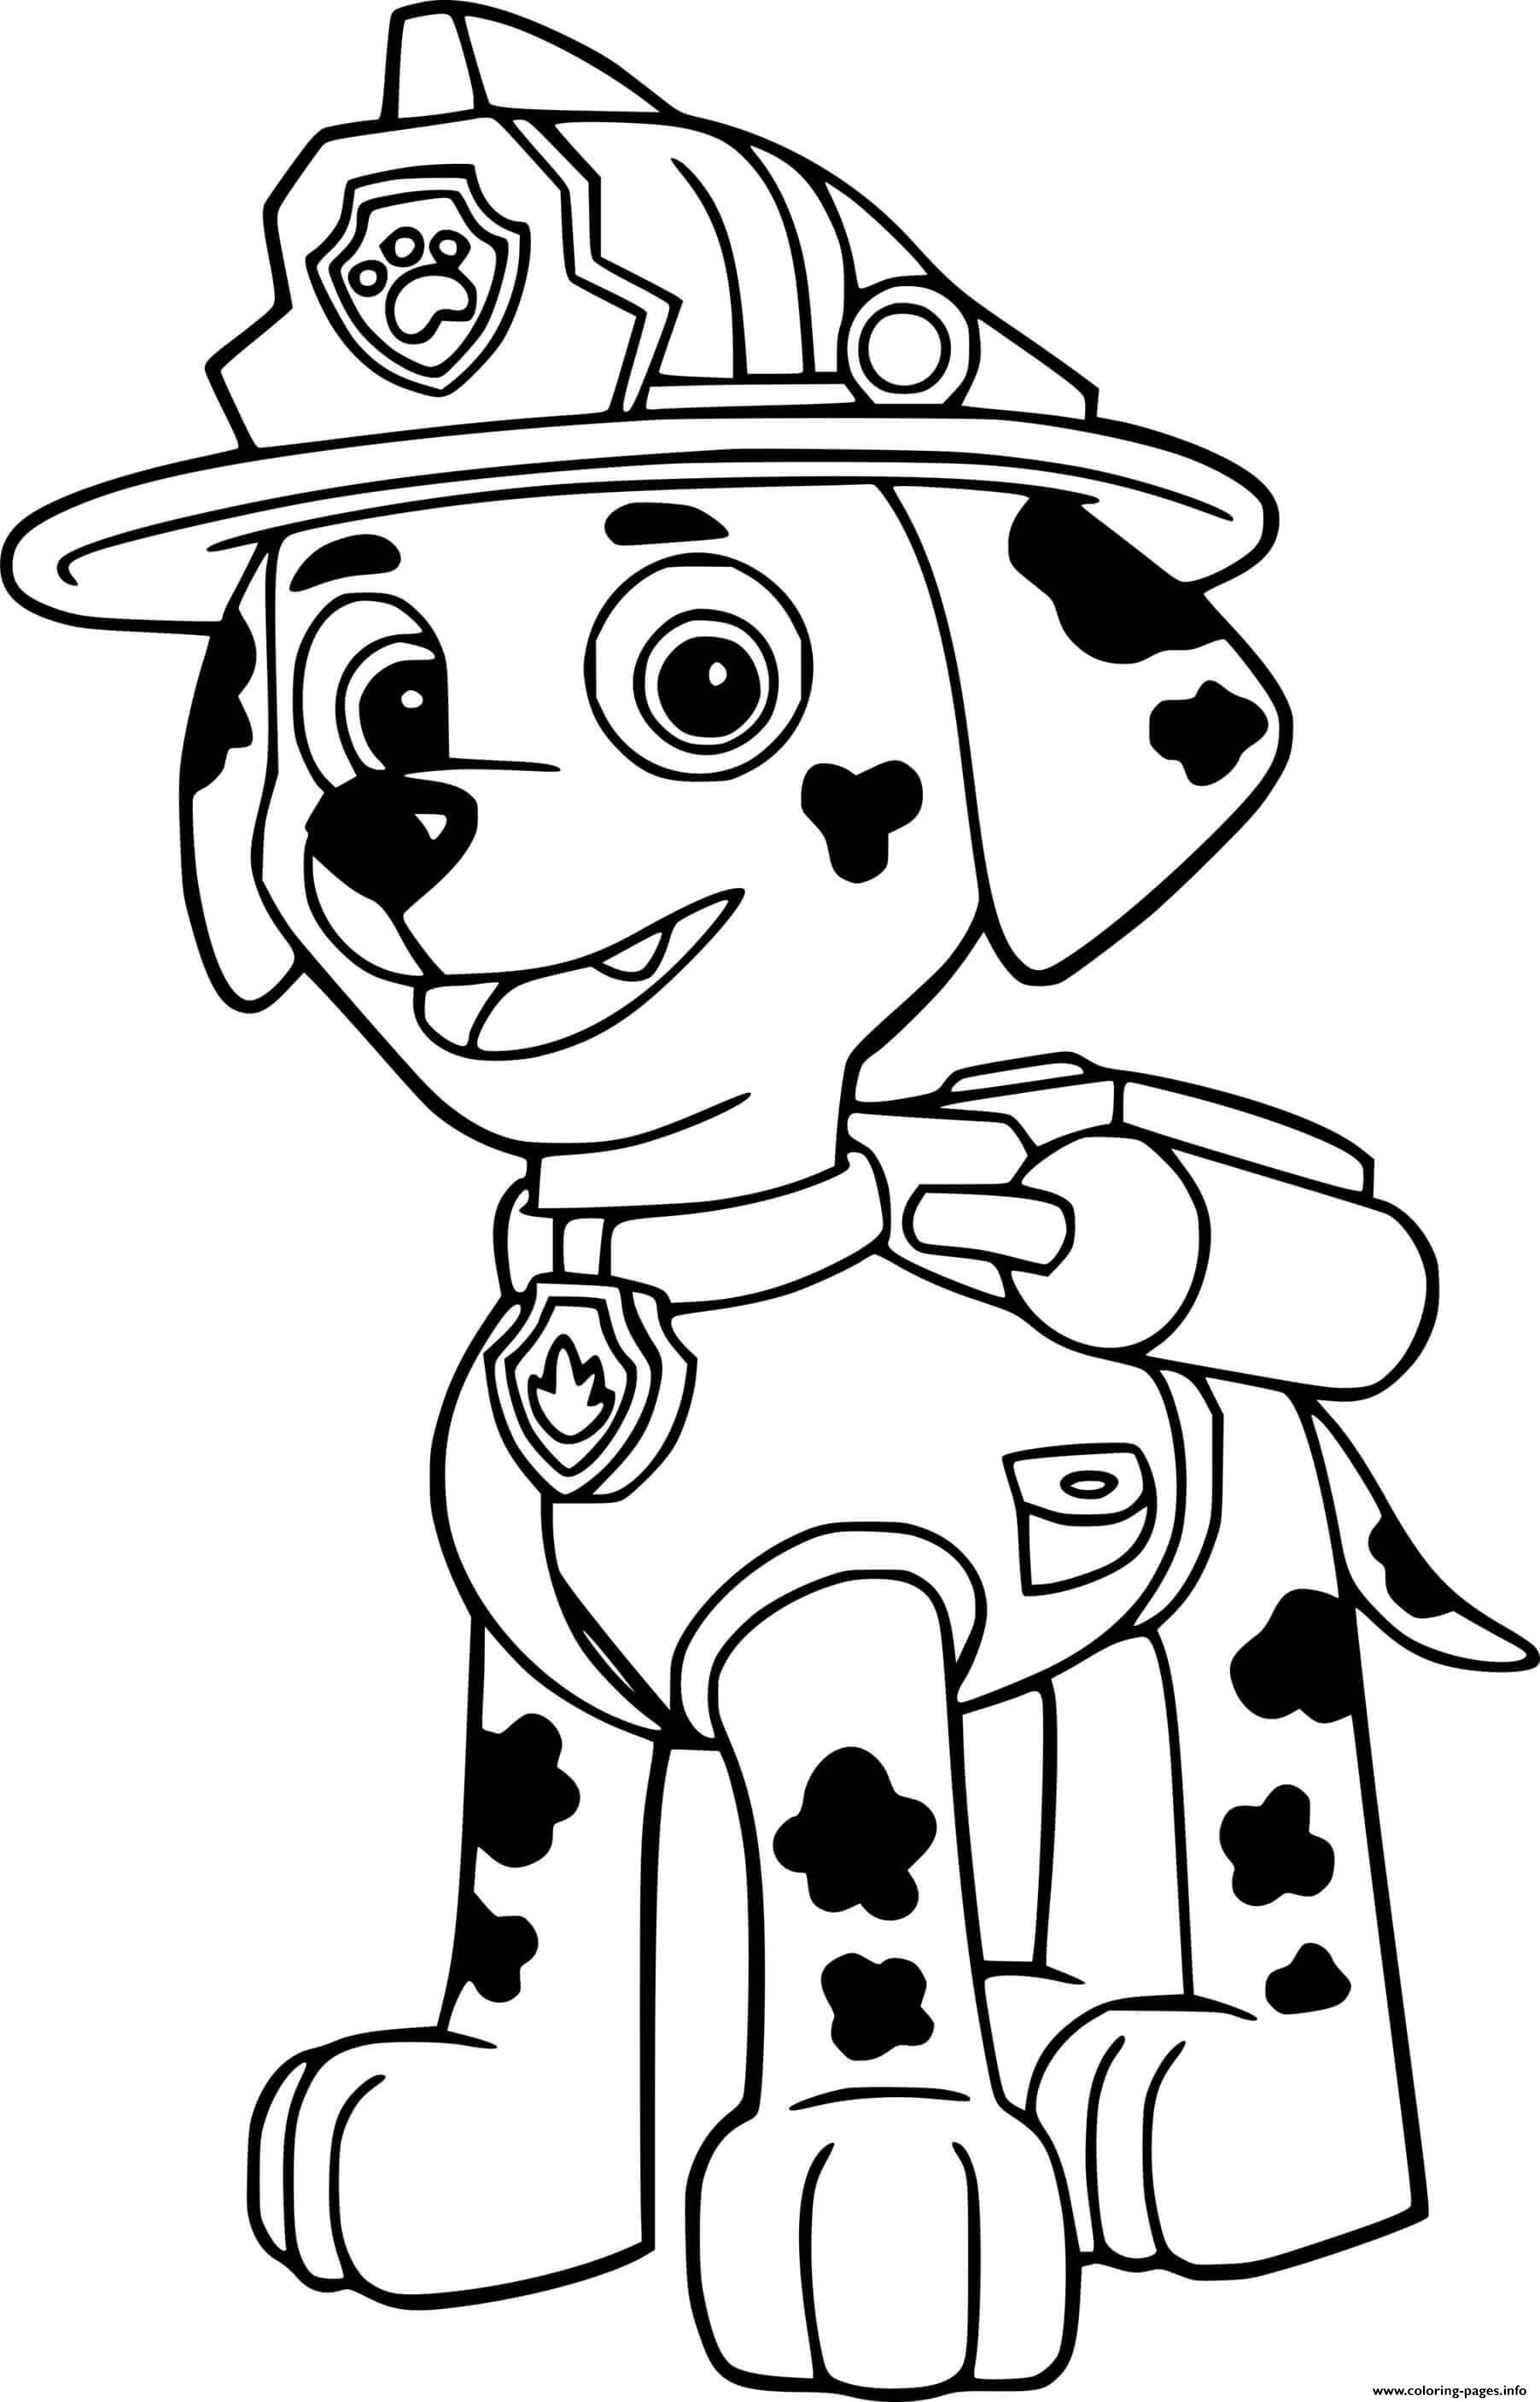 Simple Marshall From Paw Patrol coloring